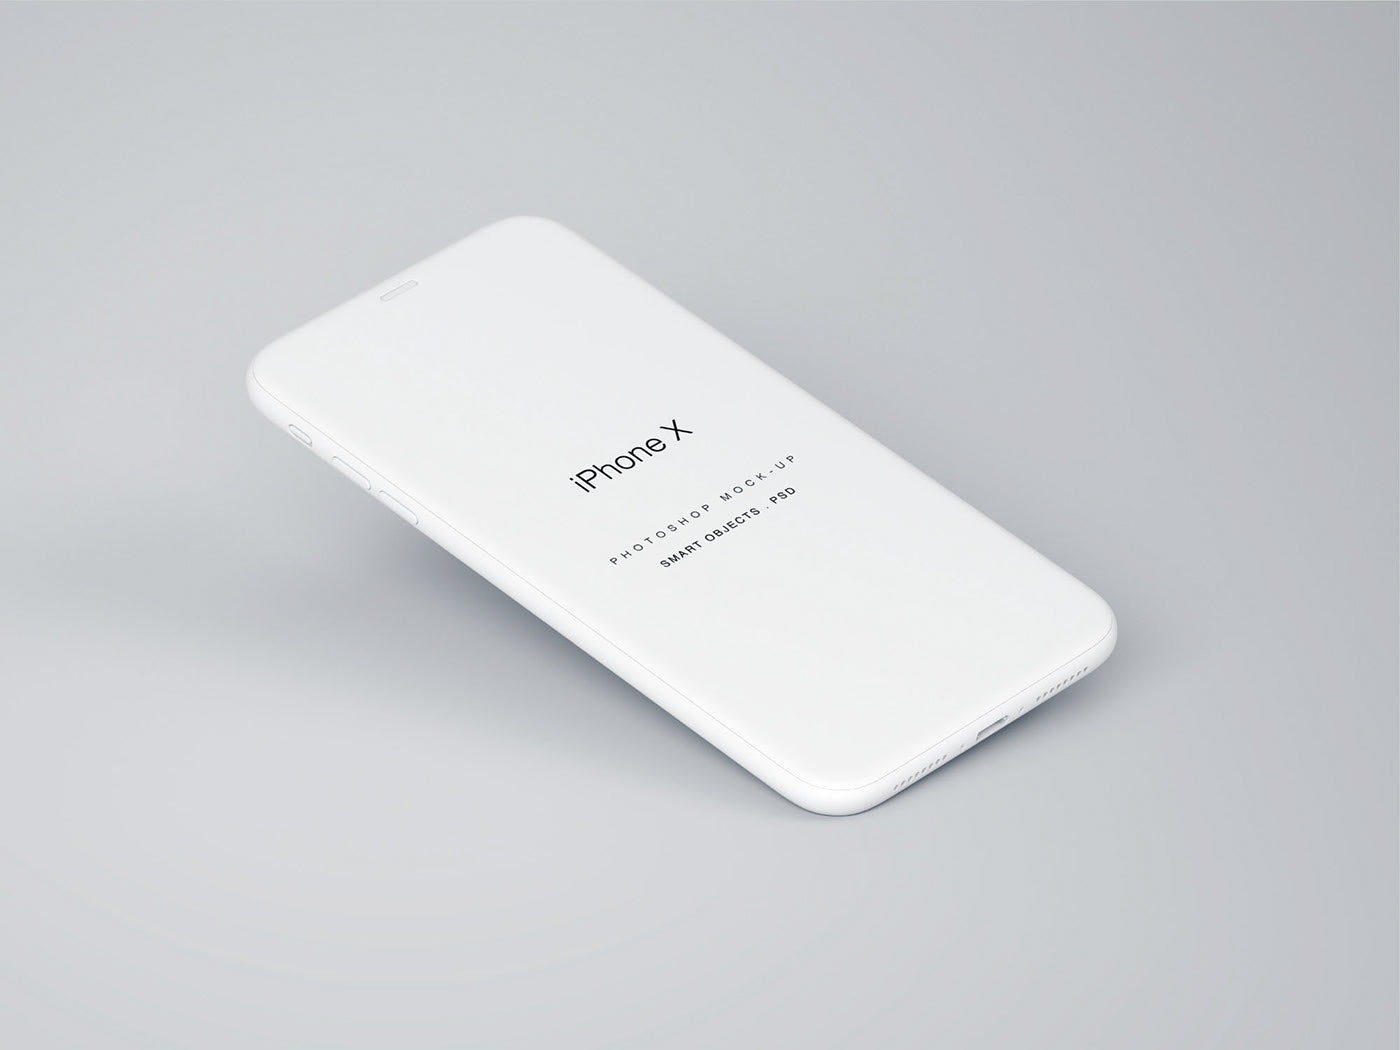 Download Free Perspective Iphone X Mockup Psd Creativebooster